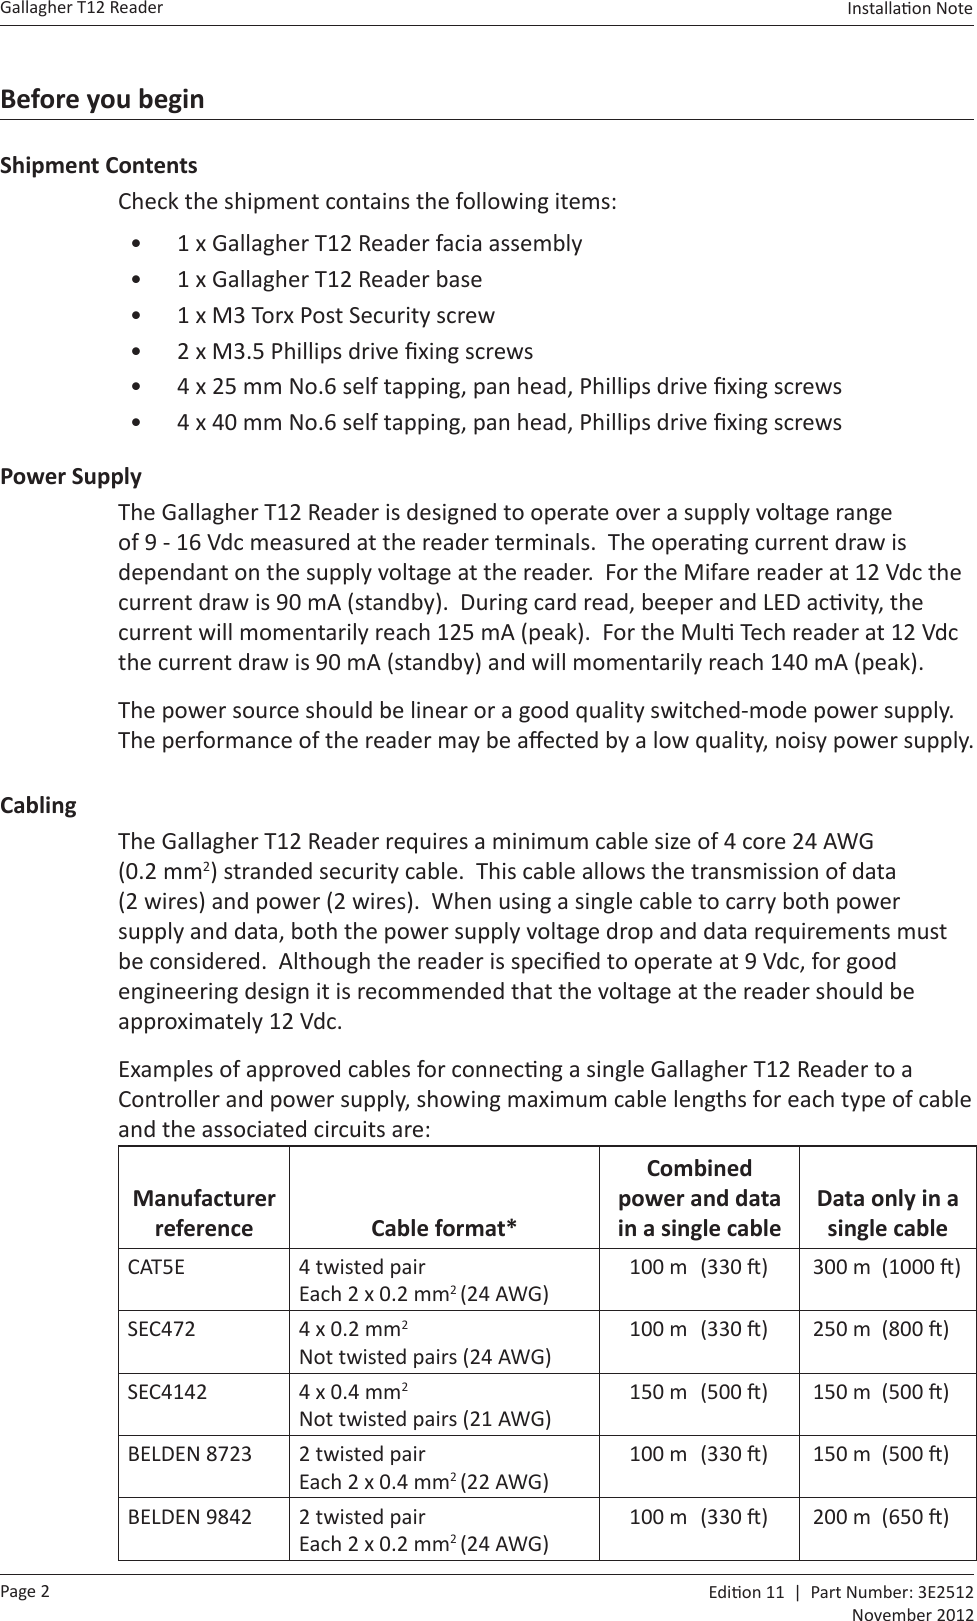 Page 2Gallagher T12 Reader  Edi on 11  |  Part Number: 3E2512November 2012Installa on Note  Before you beginShipment ContentsCheck the shipment contains the following items:•  1 x Gallagher T12 Reader facia assembly•  1 x Gallagher T12 Reader base•  1 x M3 Torx Post Security screw•  2 x M3.5 Phillips drive ﬁ xing screws•  4 x 25 mm No.6 self tapping, pan head, Phillips drive ﬁ xing screws•  4 x 40 mm No.6 self tapping, pan head, Phillips drive ﬁ xing screwsPower SupplyThe Gallagher T12 Reader is designed to operate over a supply voltage range of 9 - 16 Vdc measured at the reader terminals.  The opera ng current draw is dependant on the supply voltage at the reader.  For the Mifare reader at 12 Vdc the current draw is 90 mA (standby).  During card read, beeper and LED ac vity, the current will momentarily reach 125 mA (peak).  For the Mul  Tech reader at 12 Vdc the current draw is 90 mA (standby) and will momentarily reach 140 mA (peak).The power source should be linear or a good quality switched-mode power supply.  The performance of the reader may be aﬀ ected by a low quality, noisy power supply.CablingThe Gallagher T12 Reader requires a minimum cable size of 4 core 24 AWG (0.2 mm2) stranded security cable.  This cable allows the transmission of data (2 wires) and power (2 wires).  When using a single cable to carry both power supply and data, both the power supply voltage drop and data requirements must be considered.  Although the reader is speciﬁ ed to operate at 9 Vdc, for good engineering design it is recommended that the voltage at the reader should be approximately 12 Vdc. Examples of approved cables for connec ng a single Gallagher T12 Reader to a Controller and power supply, showing maximum cable lengths for each type of cable and the associated circuits are:Manufacturer reference Cable format*Combined power and data in a single cableData only in a single cableCAT5E 4 twisted pairEach 2 x 0.2 mm2 (24 AWG)100 m  (330  ) 300 m  (1000  )SEC472 4 x 0.2 mm2Not twisted pairs (24 AWG)100 m  (330  ) 250 m  (800  )SEC4142 4 x 0.4 mm2Not twisted pairs (21 AWG)150 m  (500  ) 150 m  (500  )BELDEN 8723 2 twisted pairEach 2 x 0.4 mm2 (22 AWG)100 m  (330  ) 150 m  (500  )BELDEN 9842 2 twisted pairEach 2 x 0.2 mm2 (24 AWG)100 m  (330  ) 200 m  (650  )